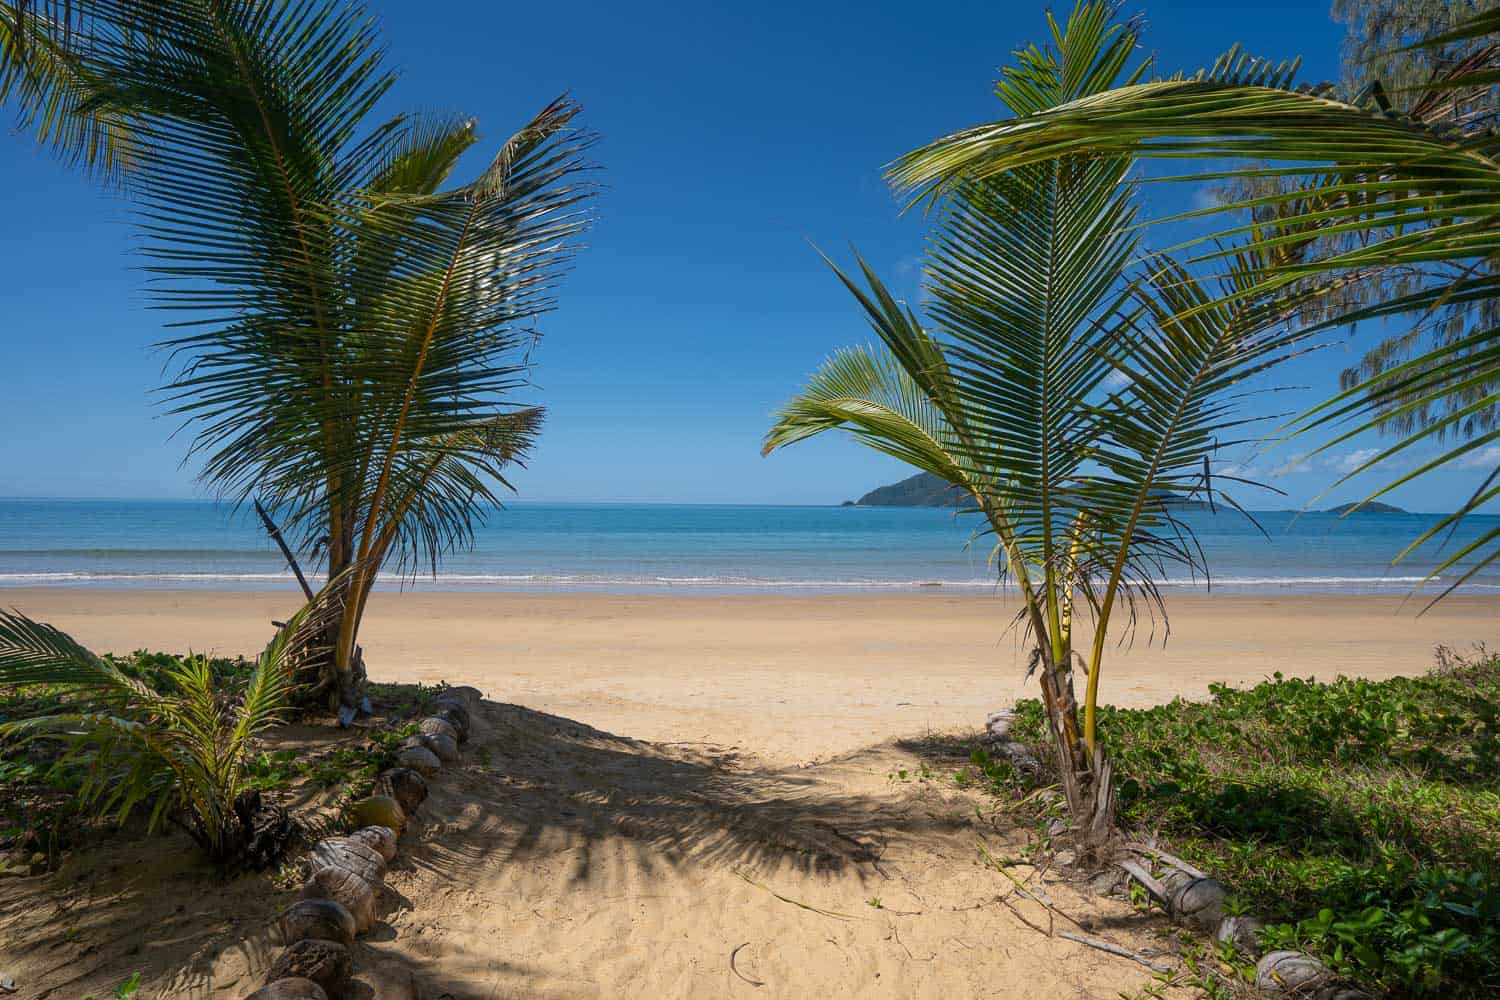 View of palm trees framing Wongaling Beach, Mission Beach, North Queensland, Australia